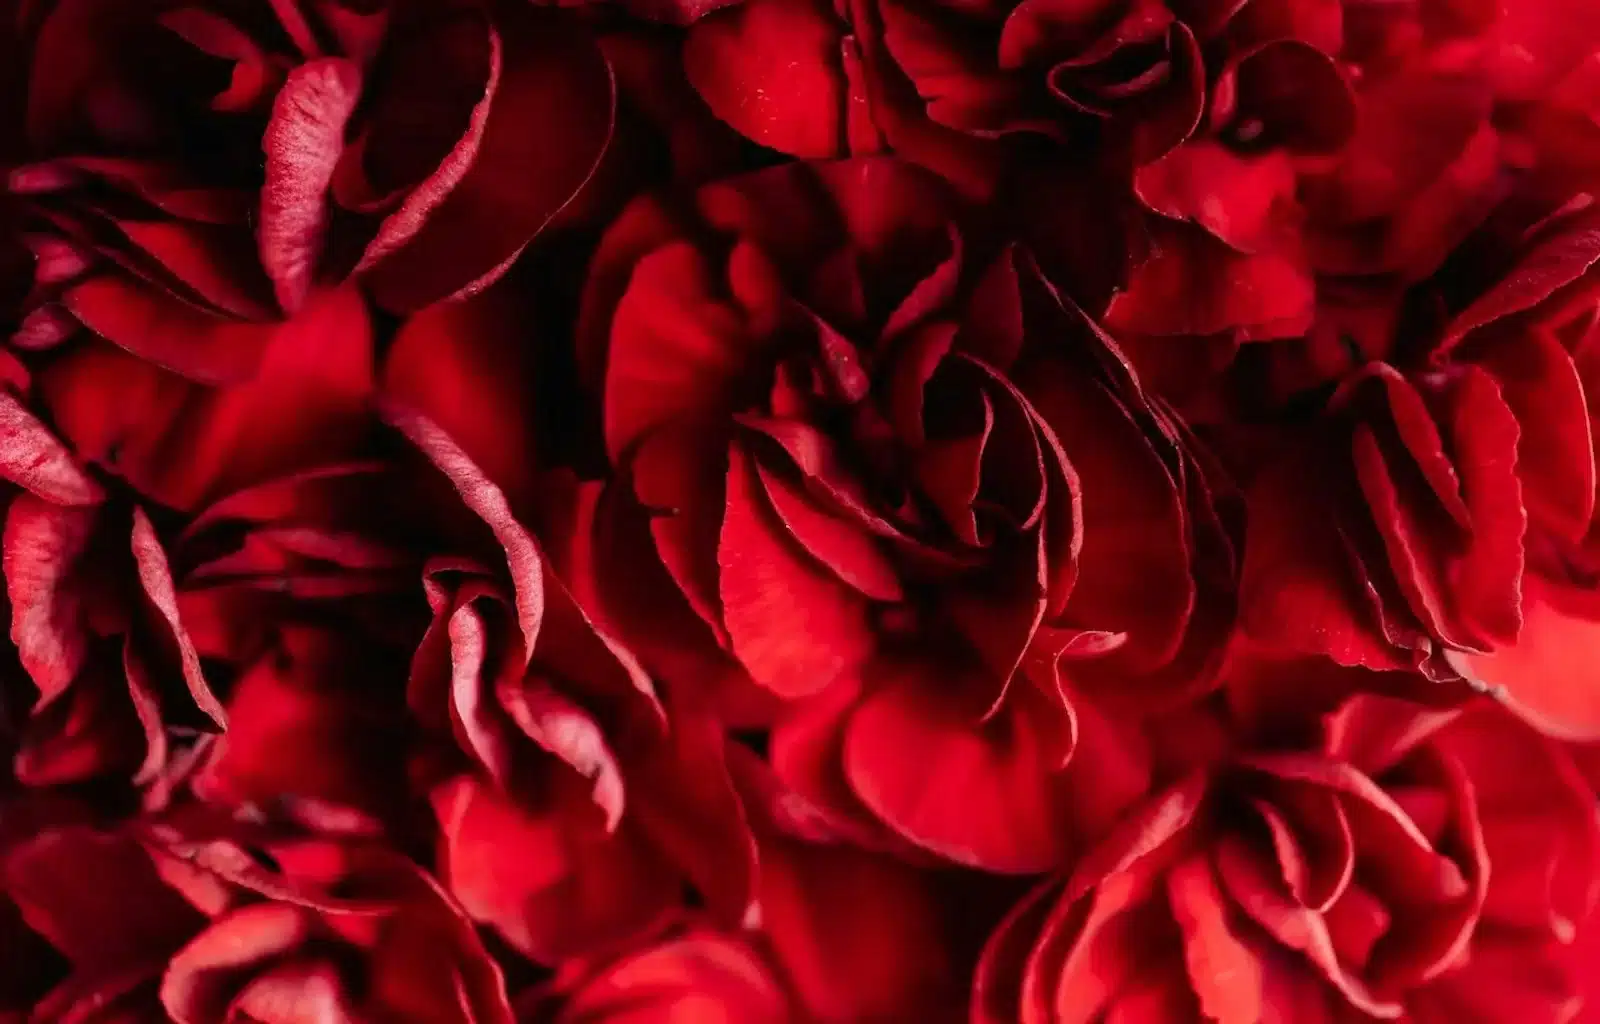 A vibrant close-up of red flowers, symbolizing the unpredictable and transformative force of love, capable of both healing and shattering lives.